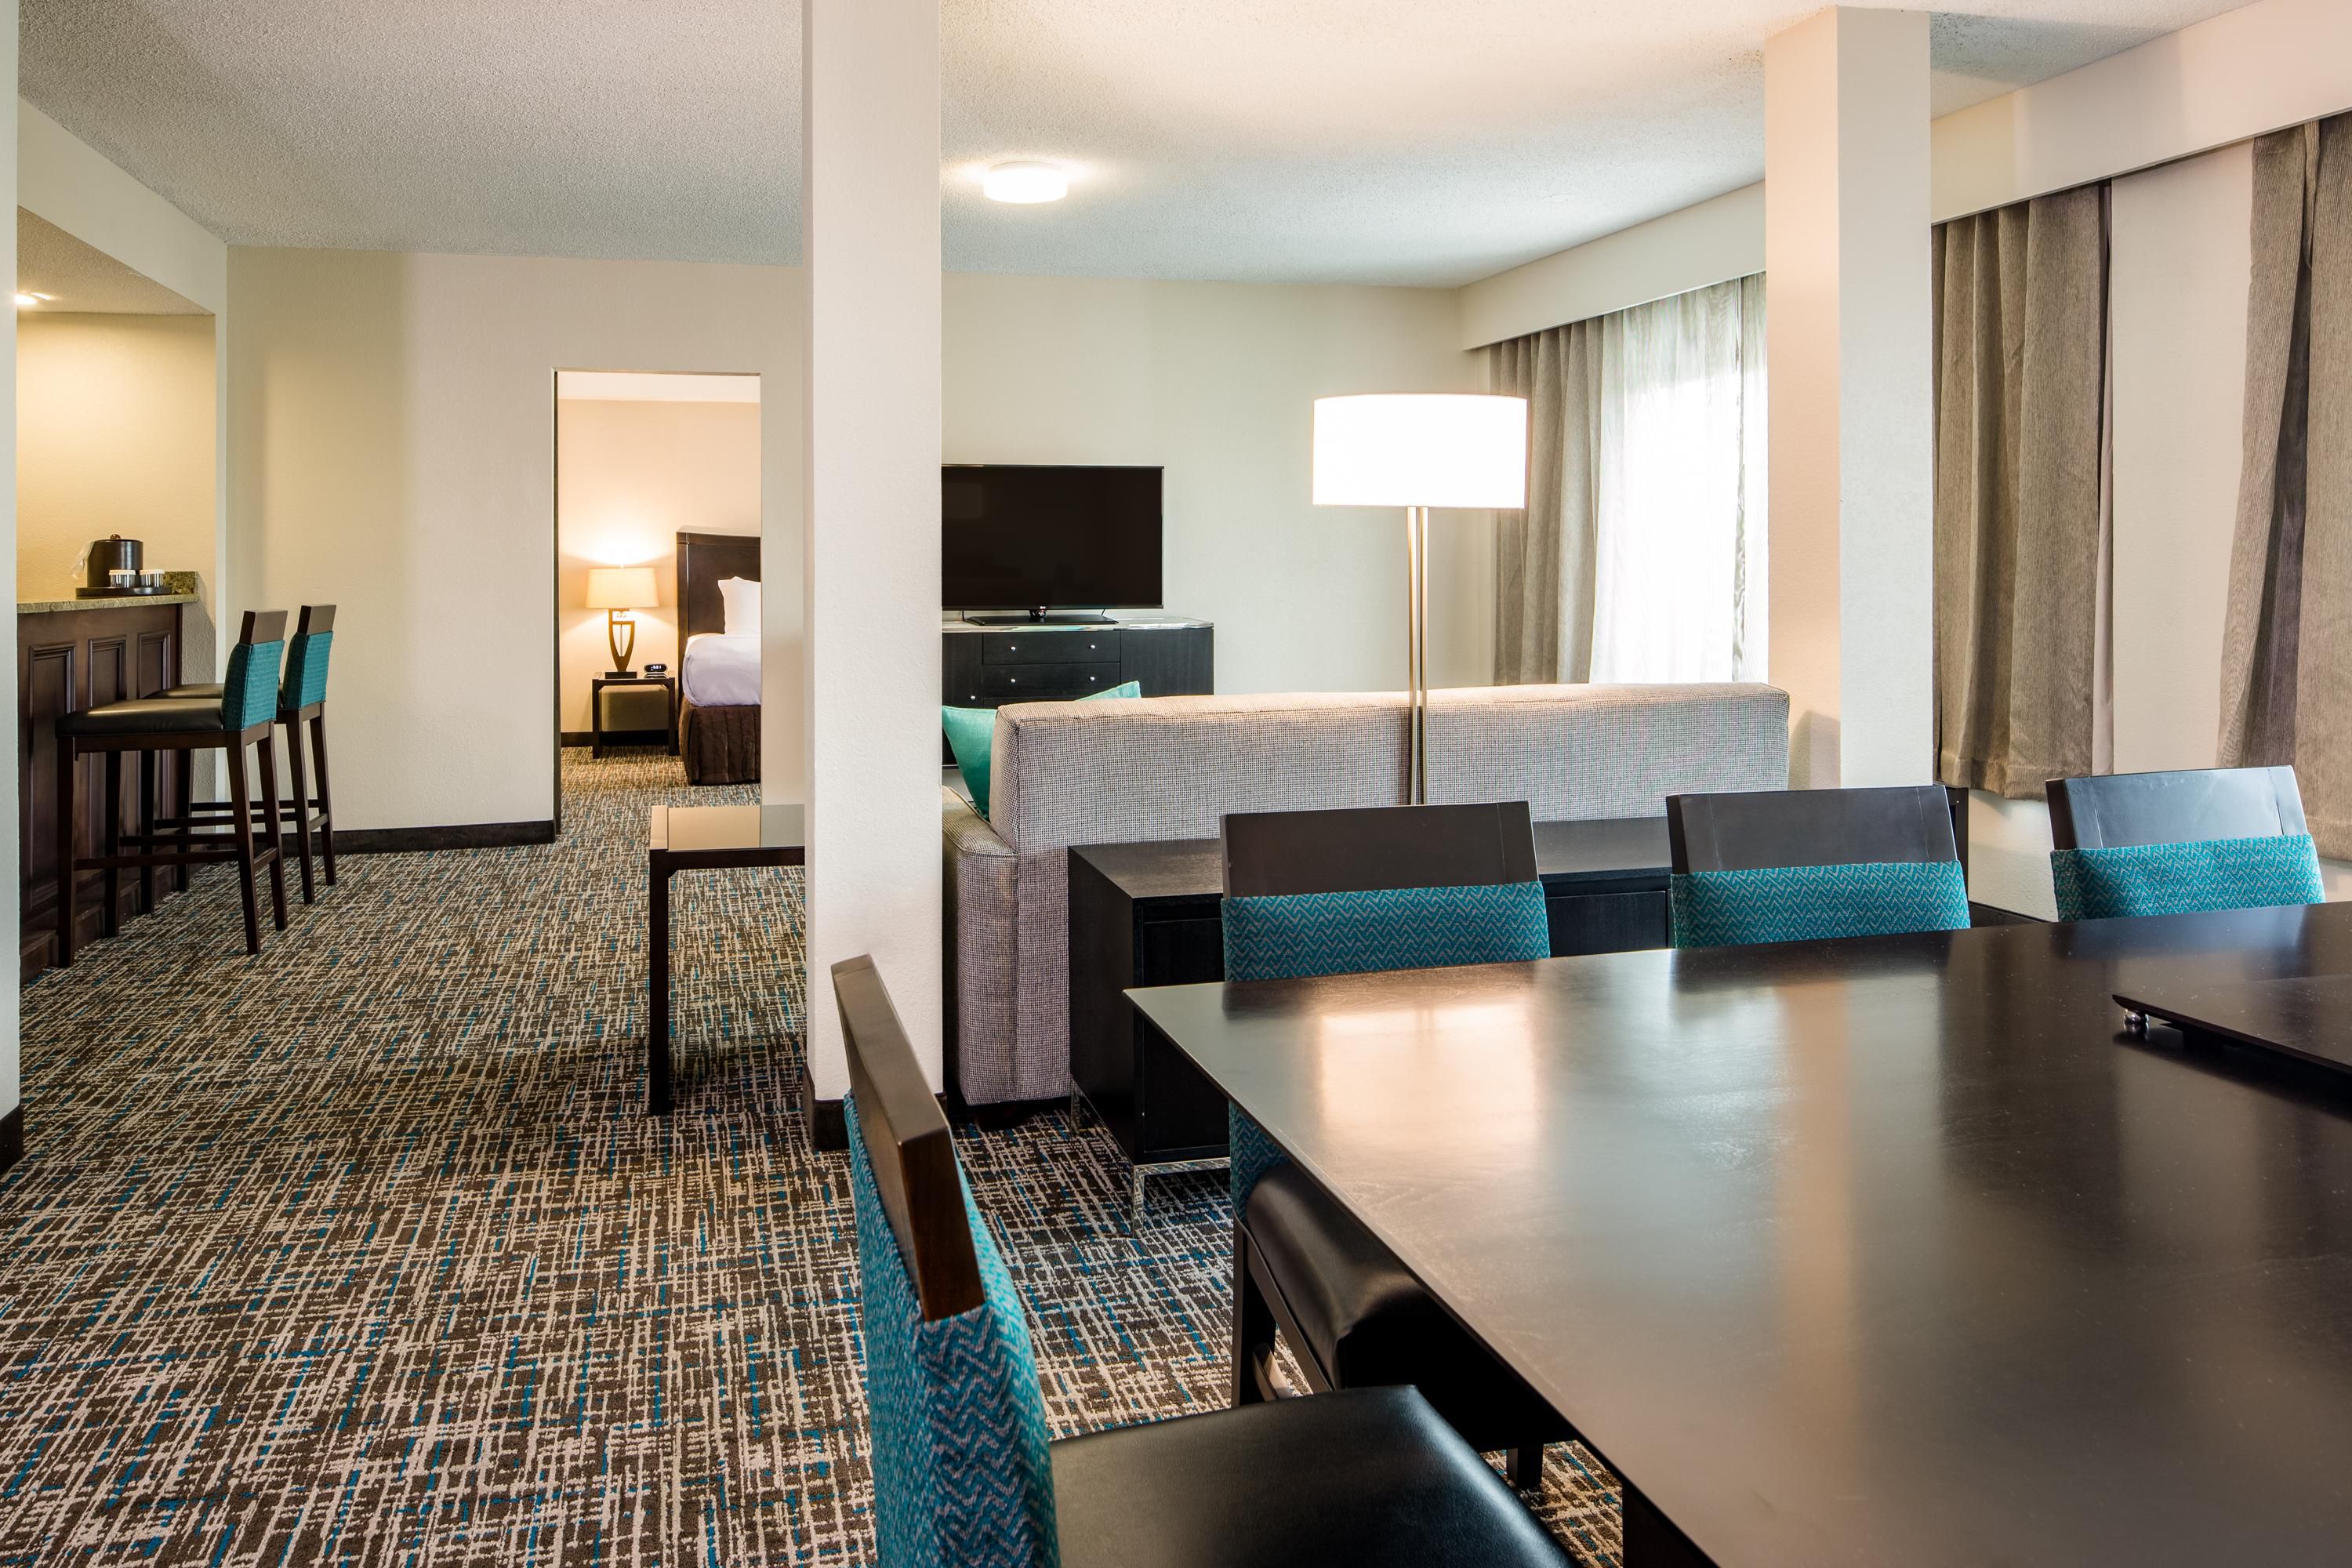 All of our rooms have been updated with a bigger seating area